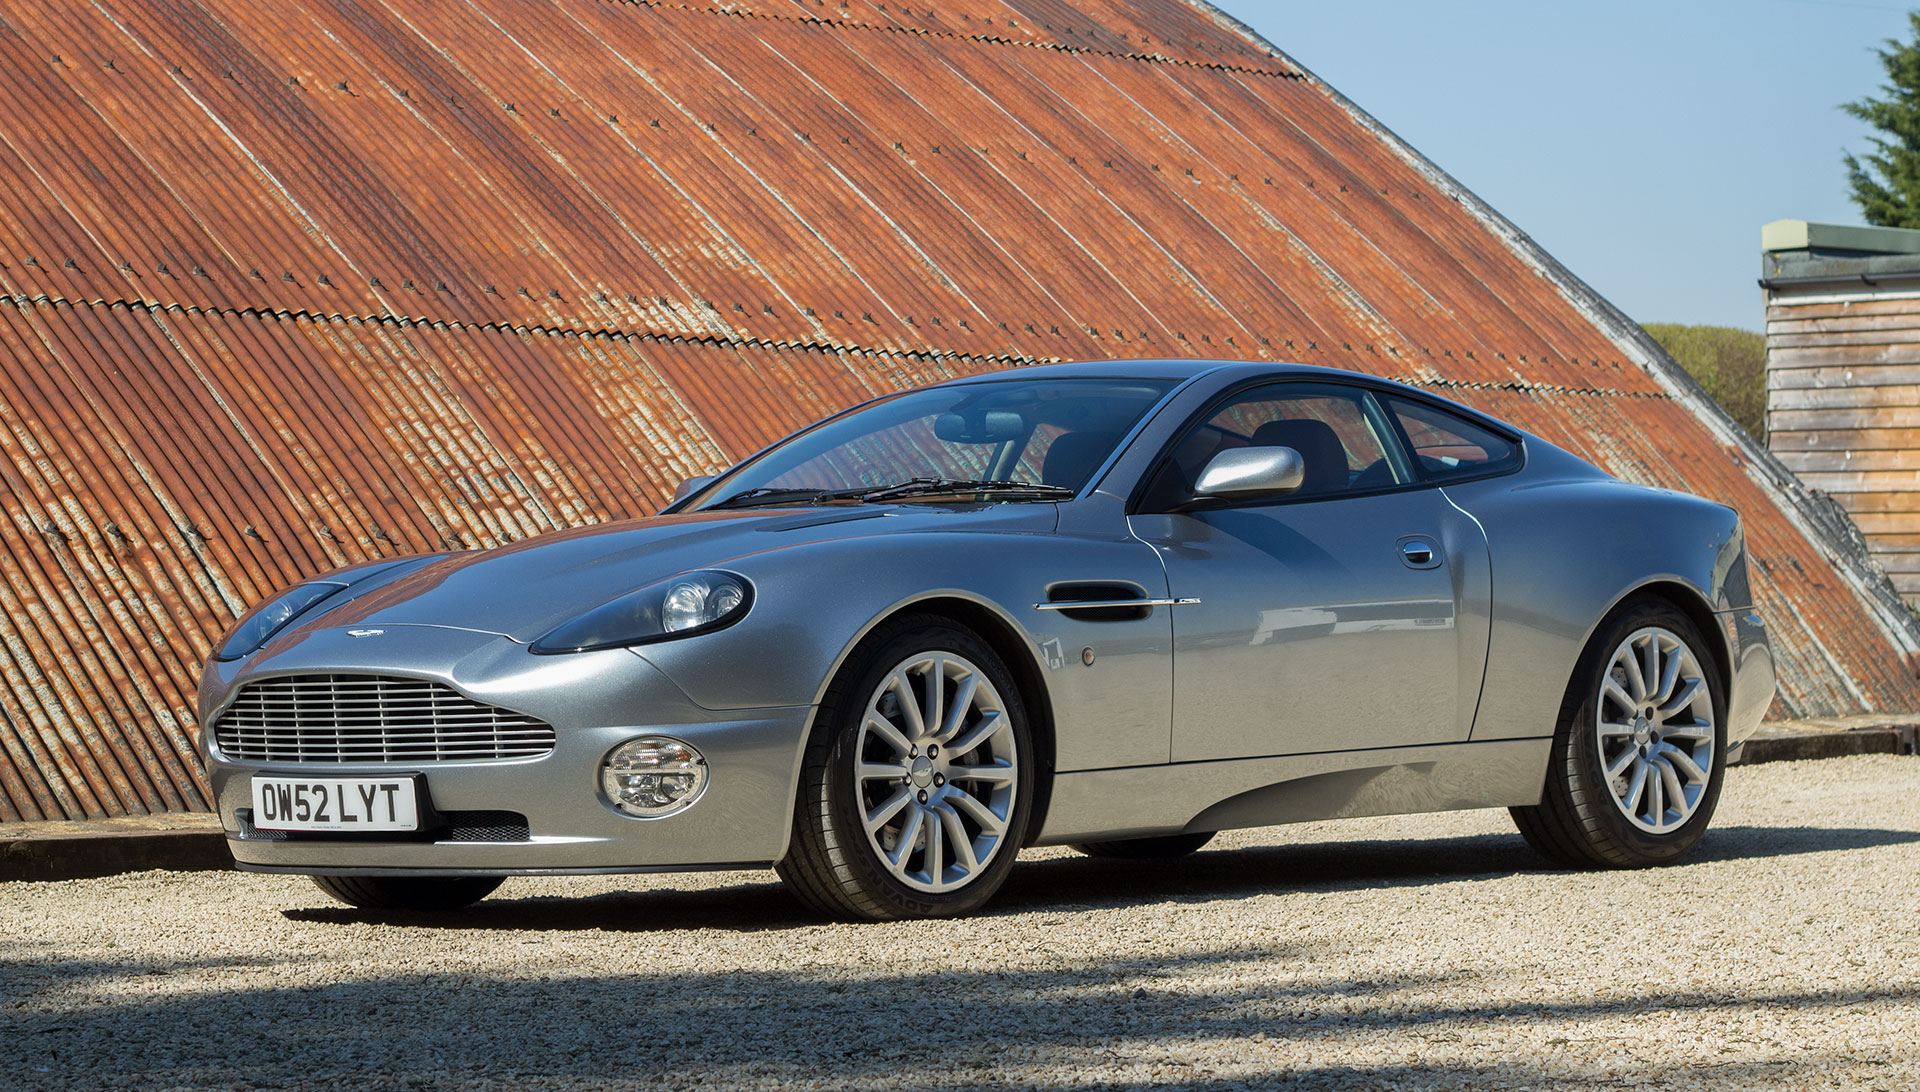 SOLD - 2003 Aston Martin V12 Vanquish - For Sale at The Classic Motor Hub